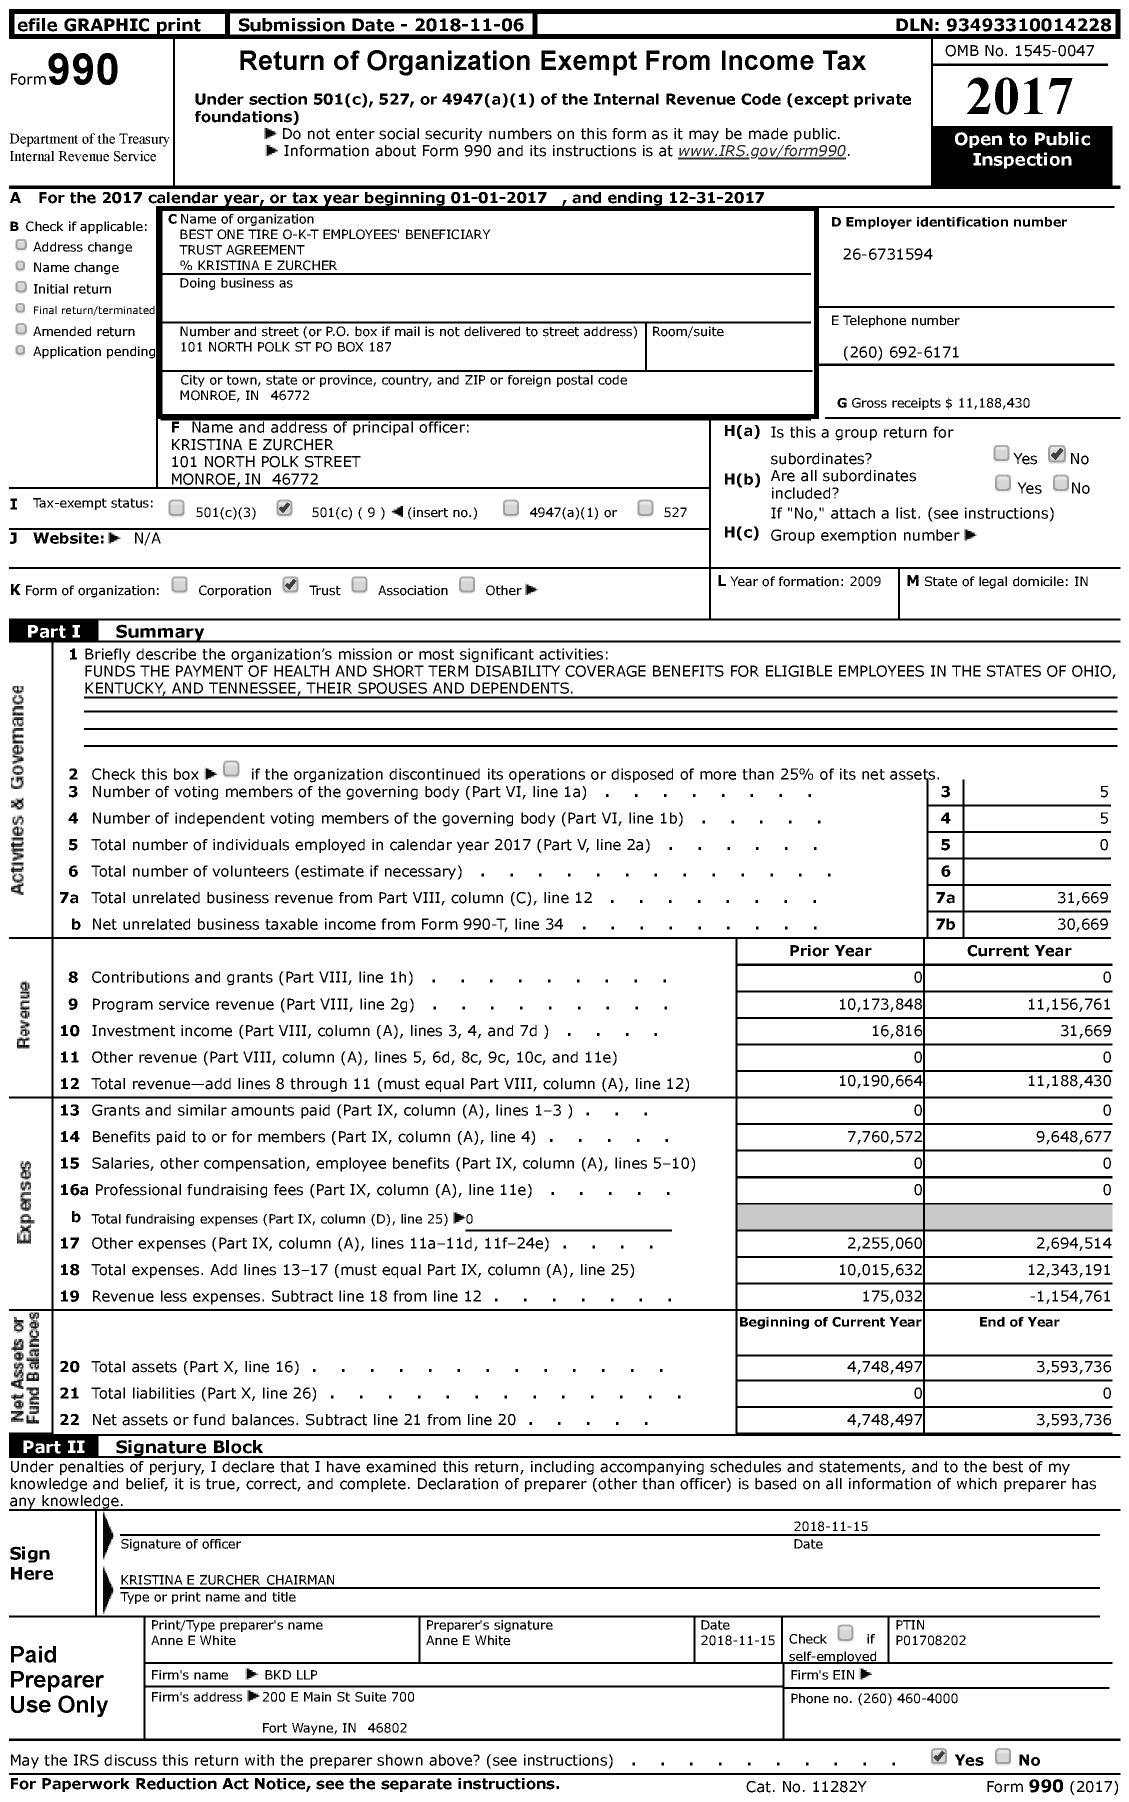 Image of first page of 2017 Form 990 for Best One Tire O-K-T Employees' Beneficiary Trust Agreement